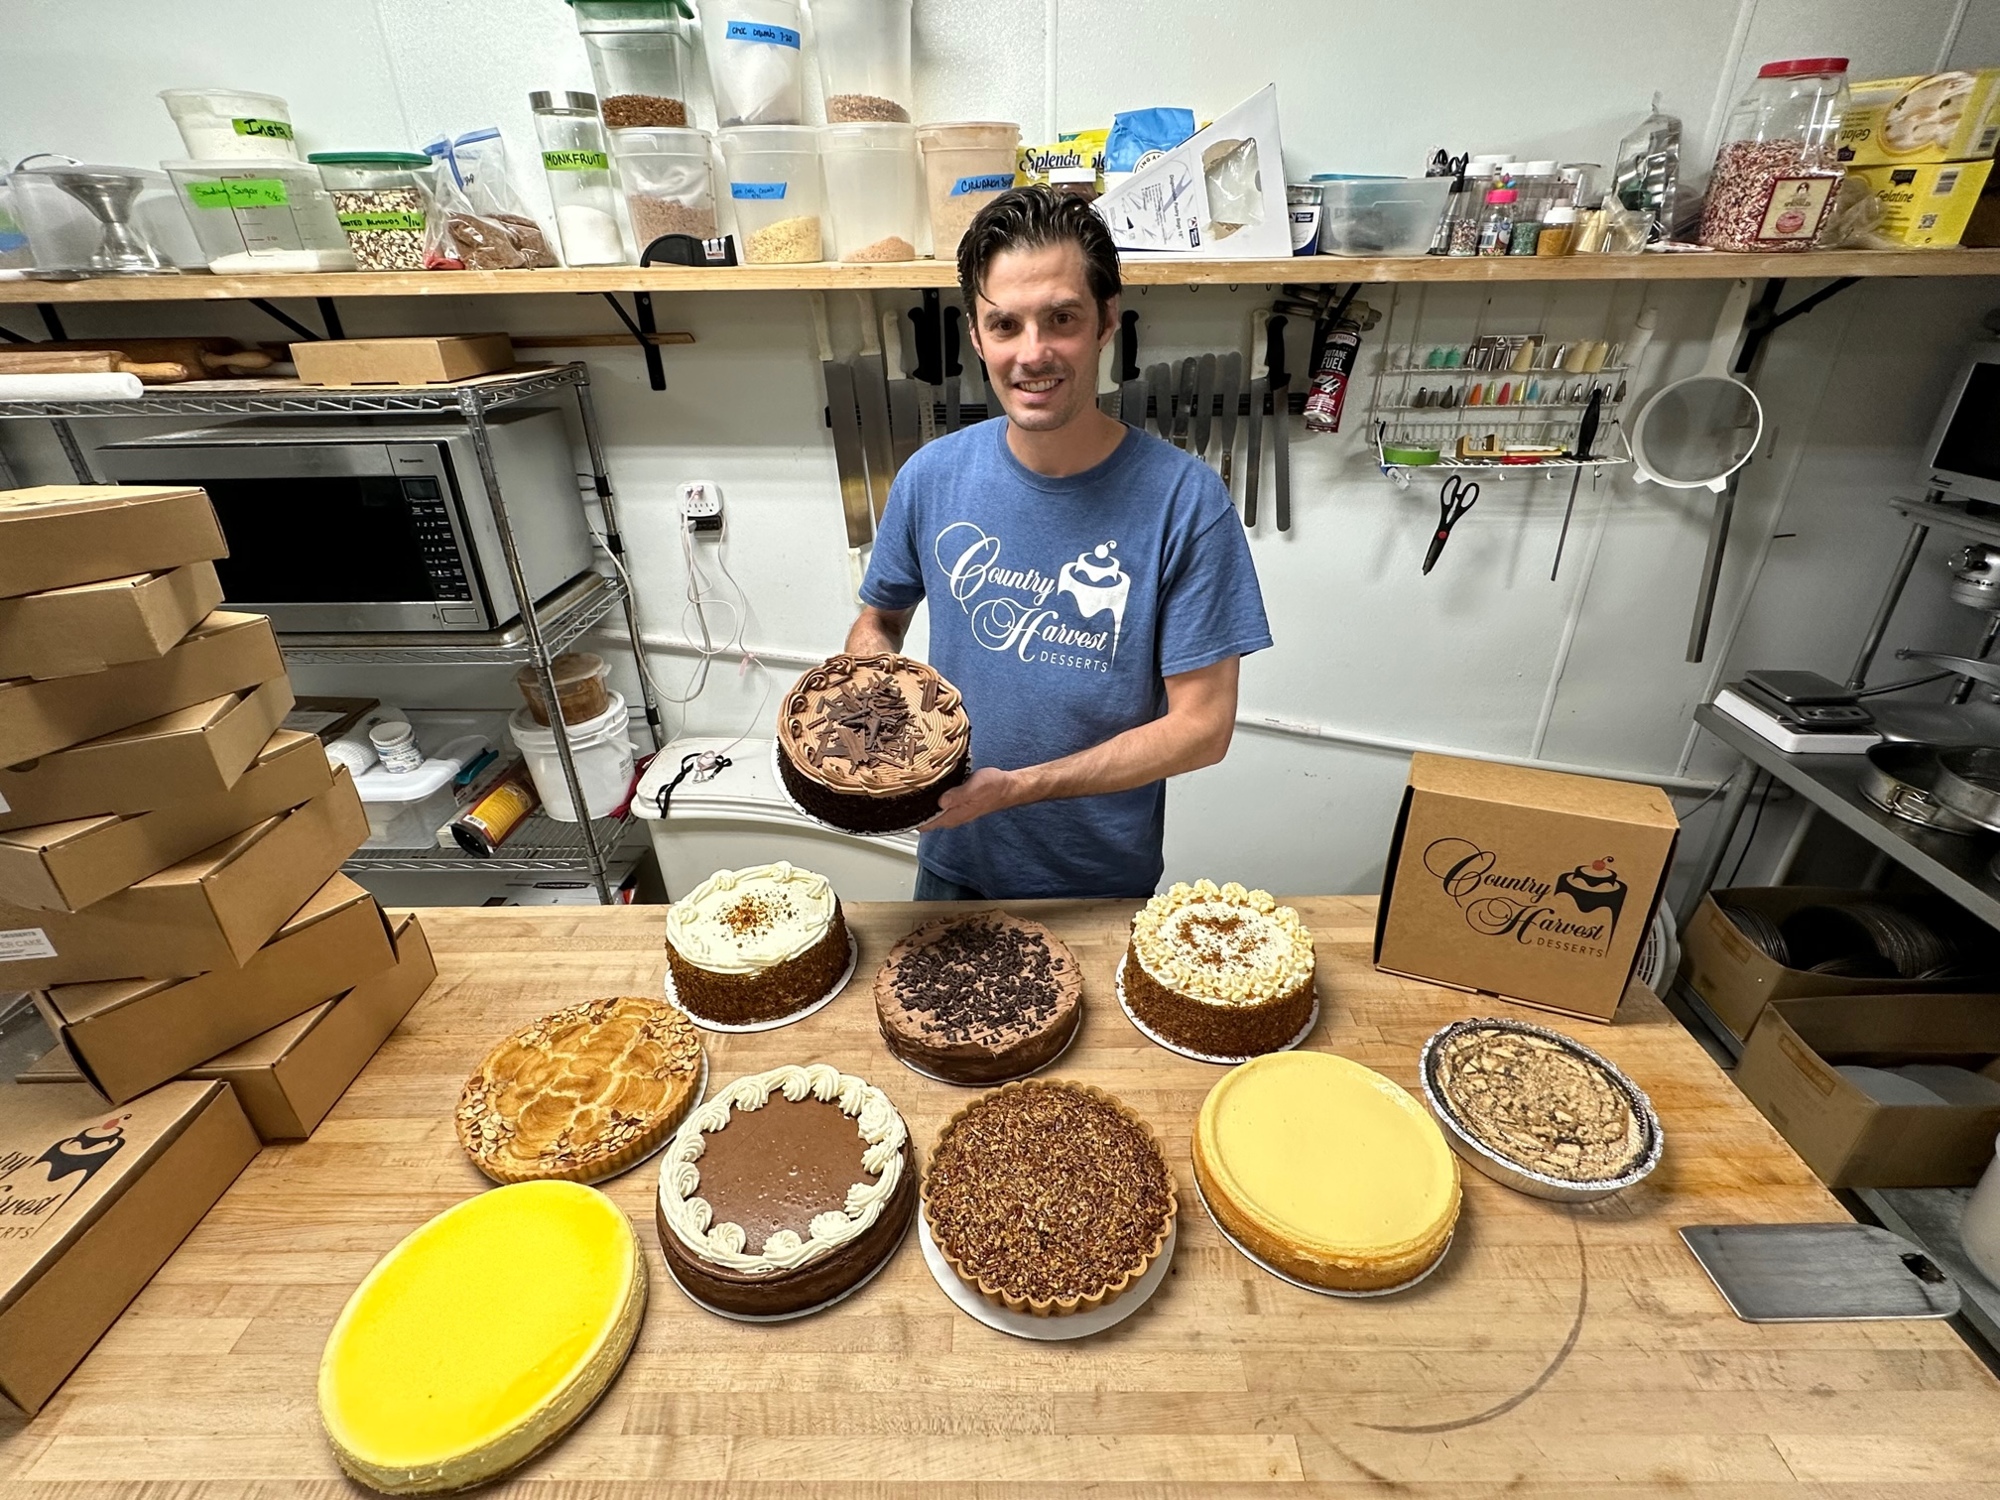 Jonathan Eddy said Country Harvest Desserts has five full- and part-time employees and he will add a few around the holidays.